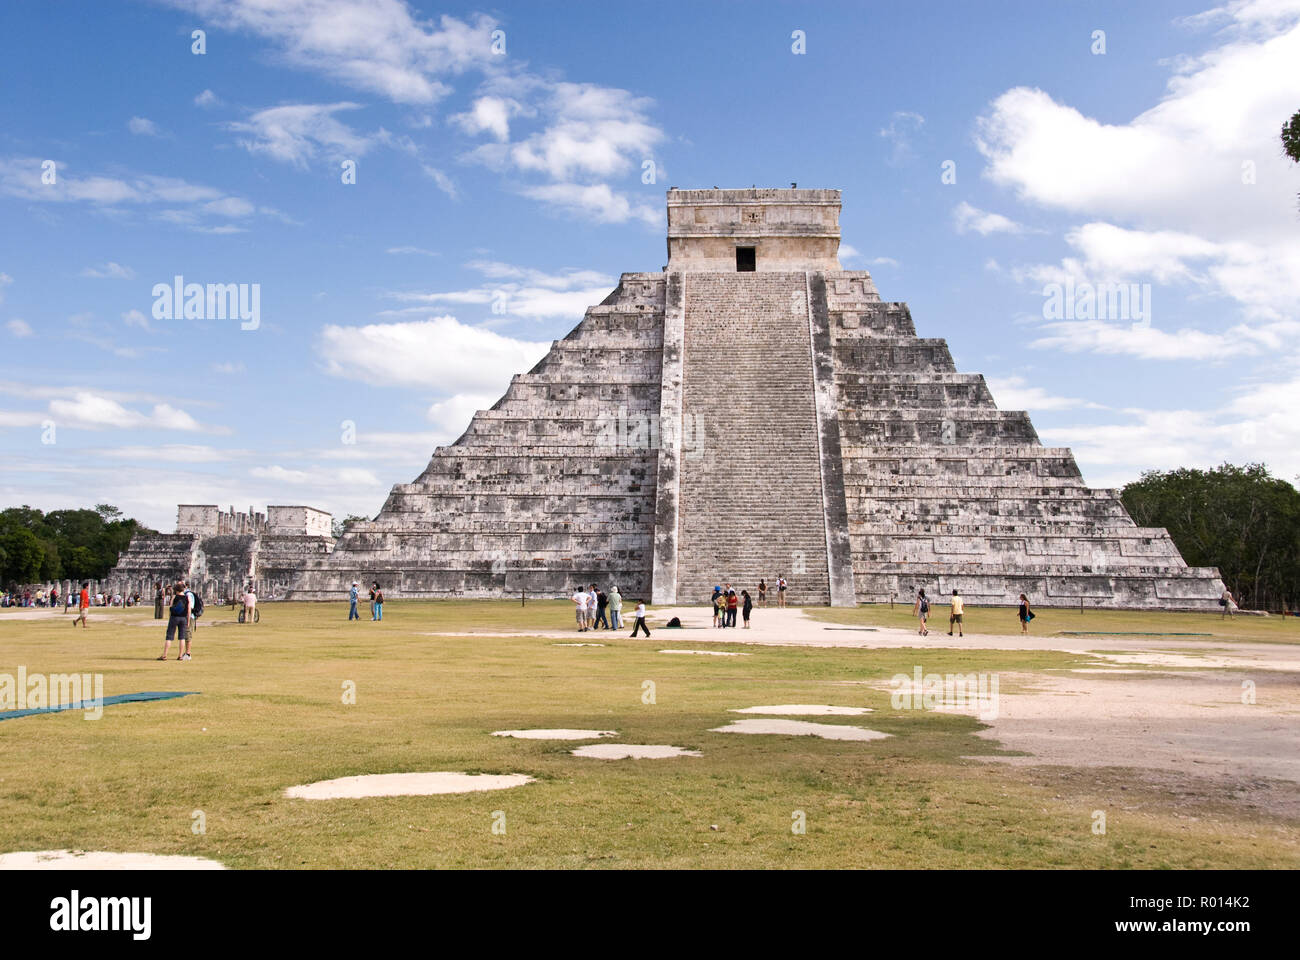 Tourists visit El Castillo, also known as the Temple of Kukulcan, a step-pyramid at Chichen Itza, Mexico. Stock Photo